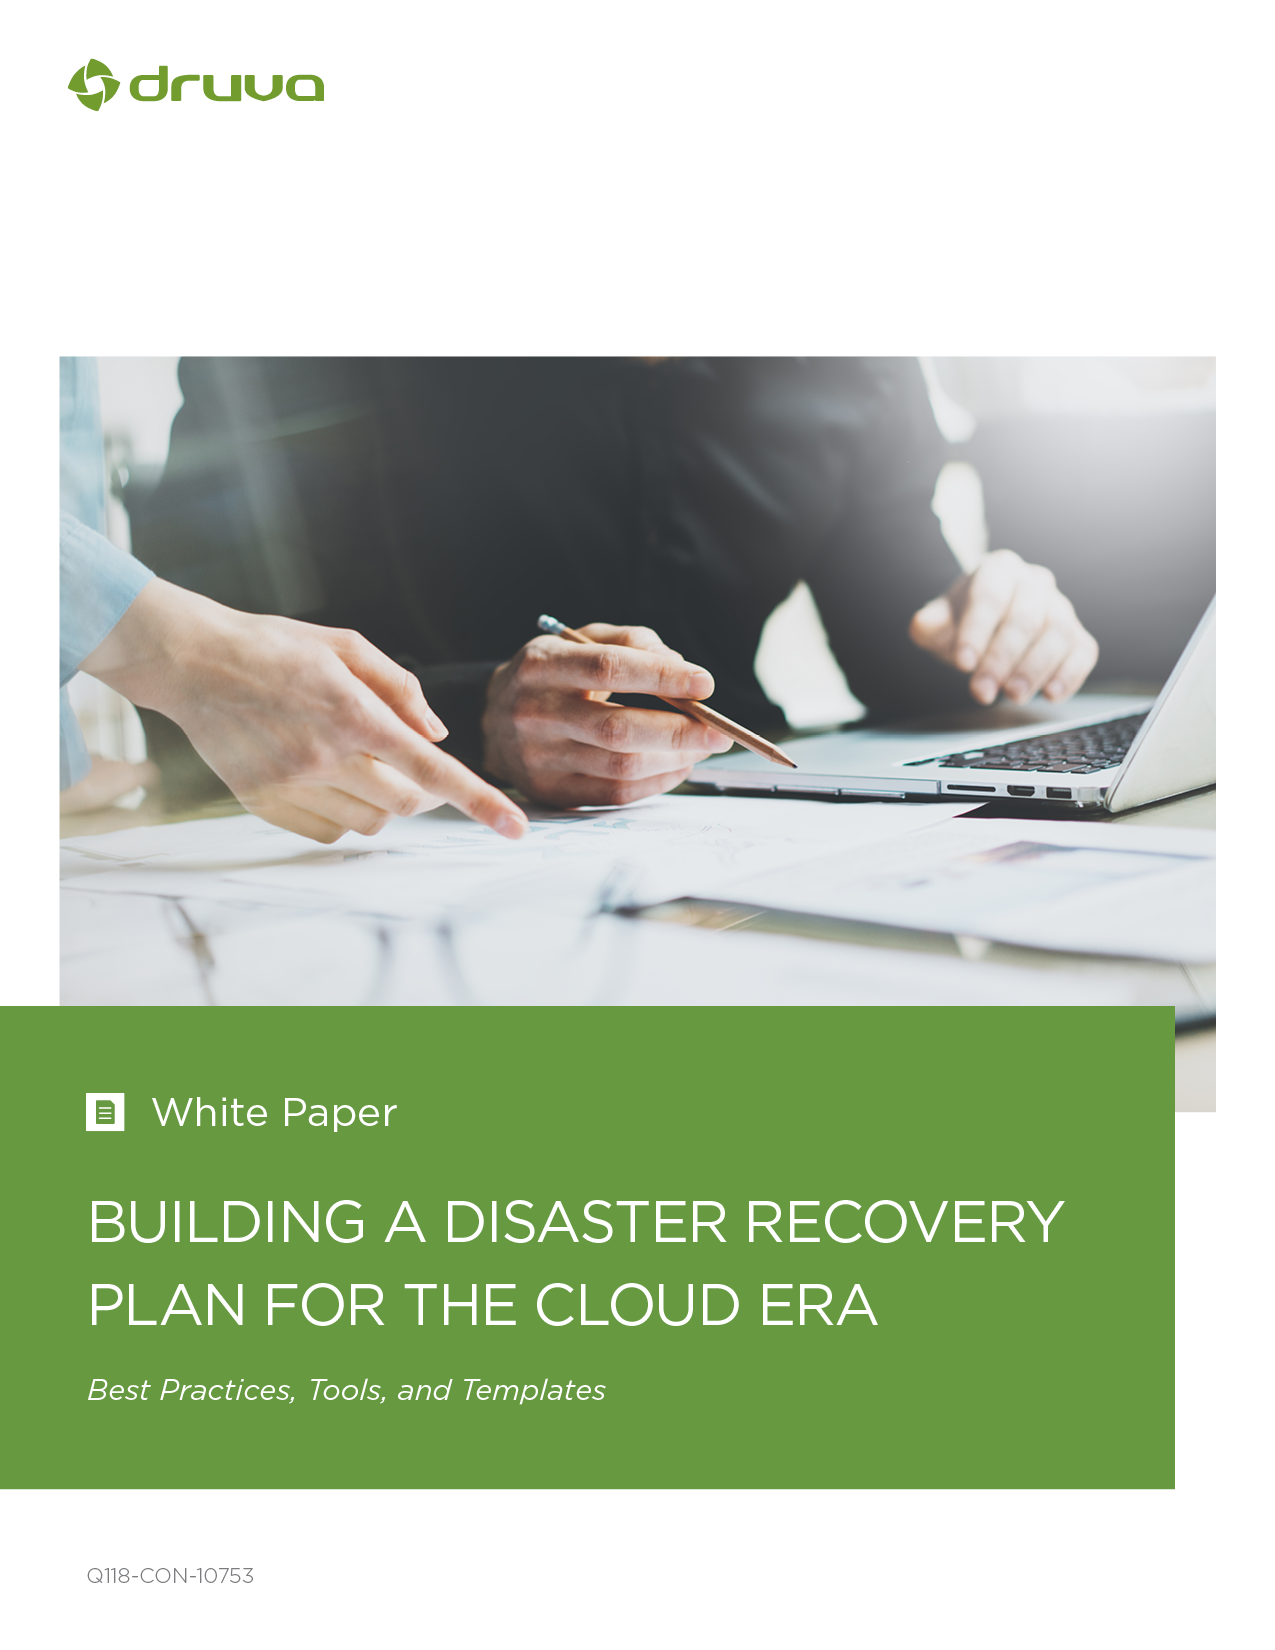 disaster recovery plan for cloud services